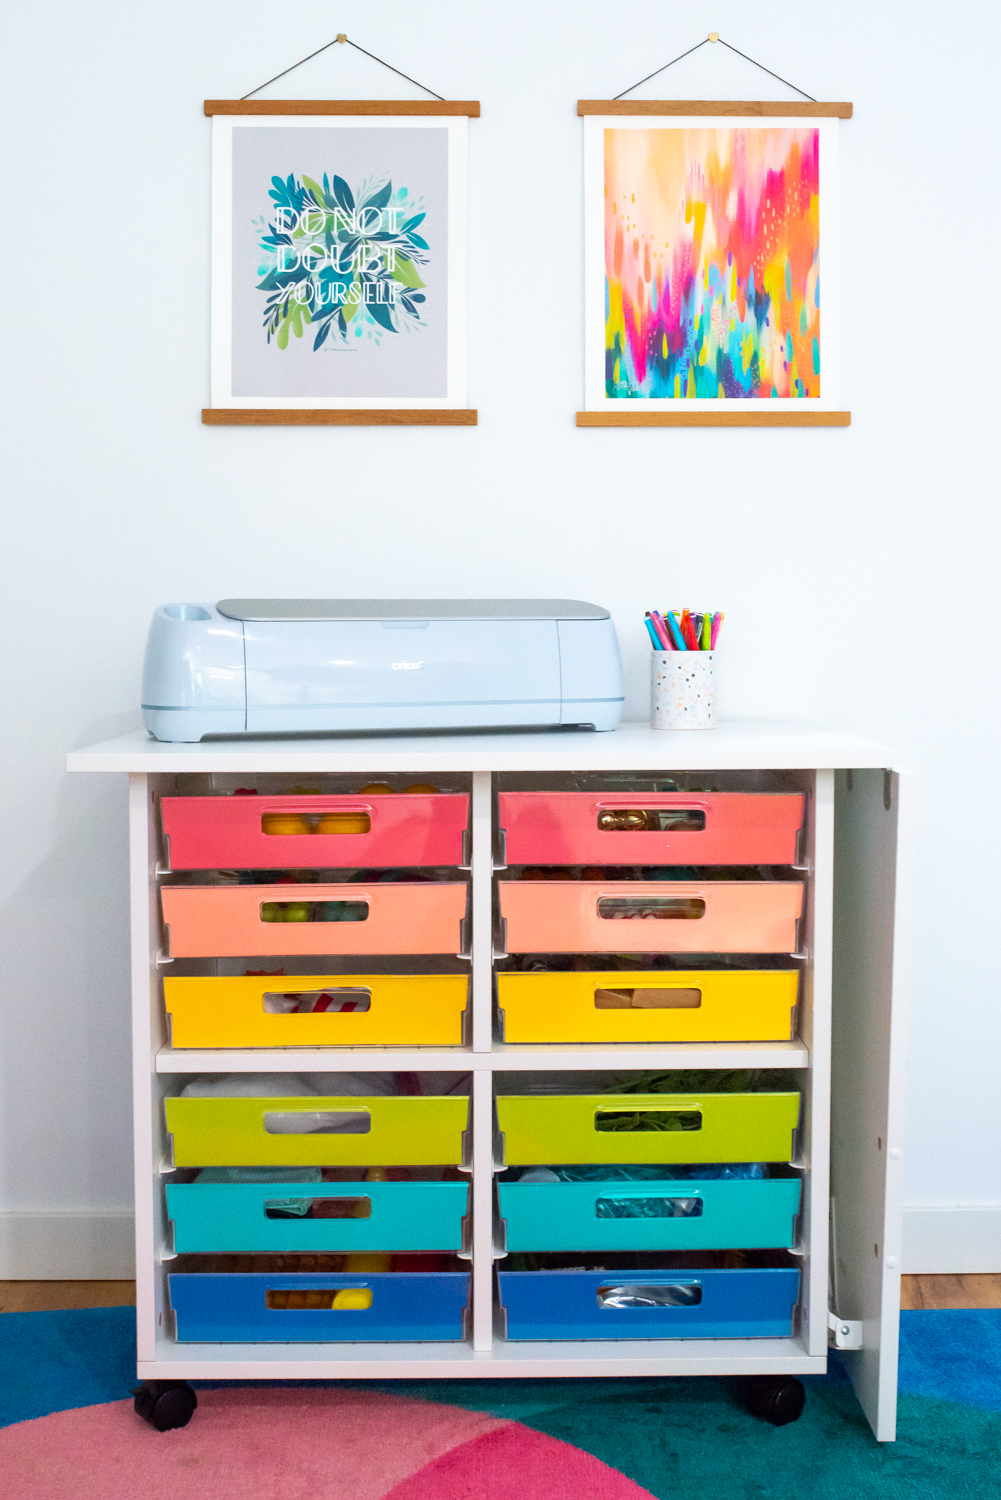 DreamCart 2 with table down and colorful drawer fronts